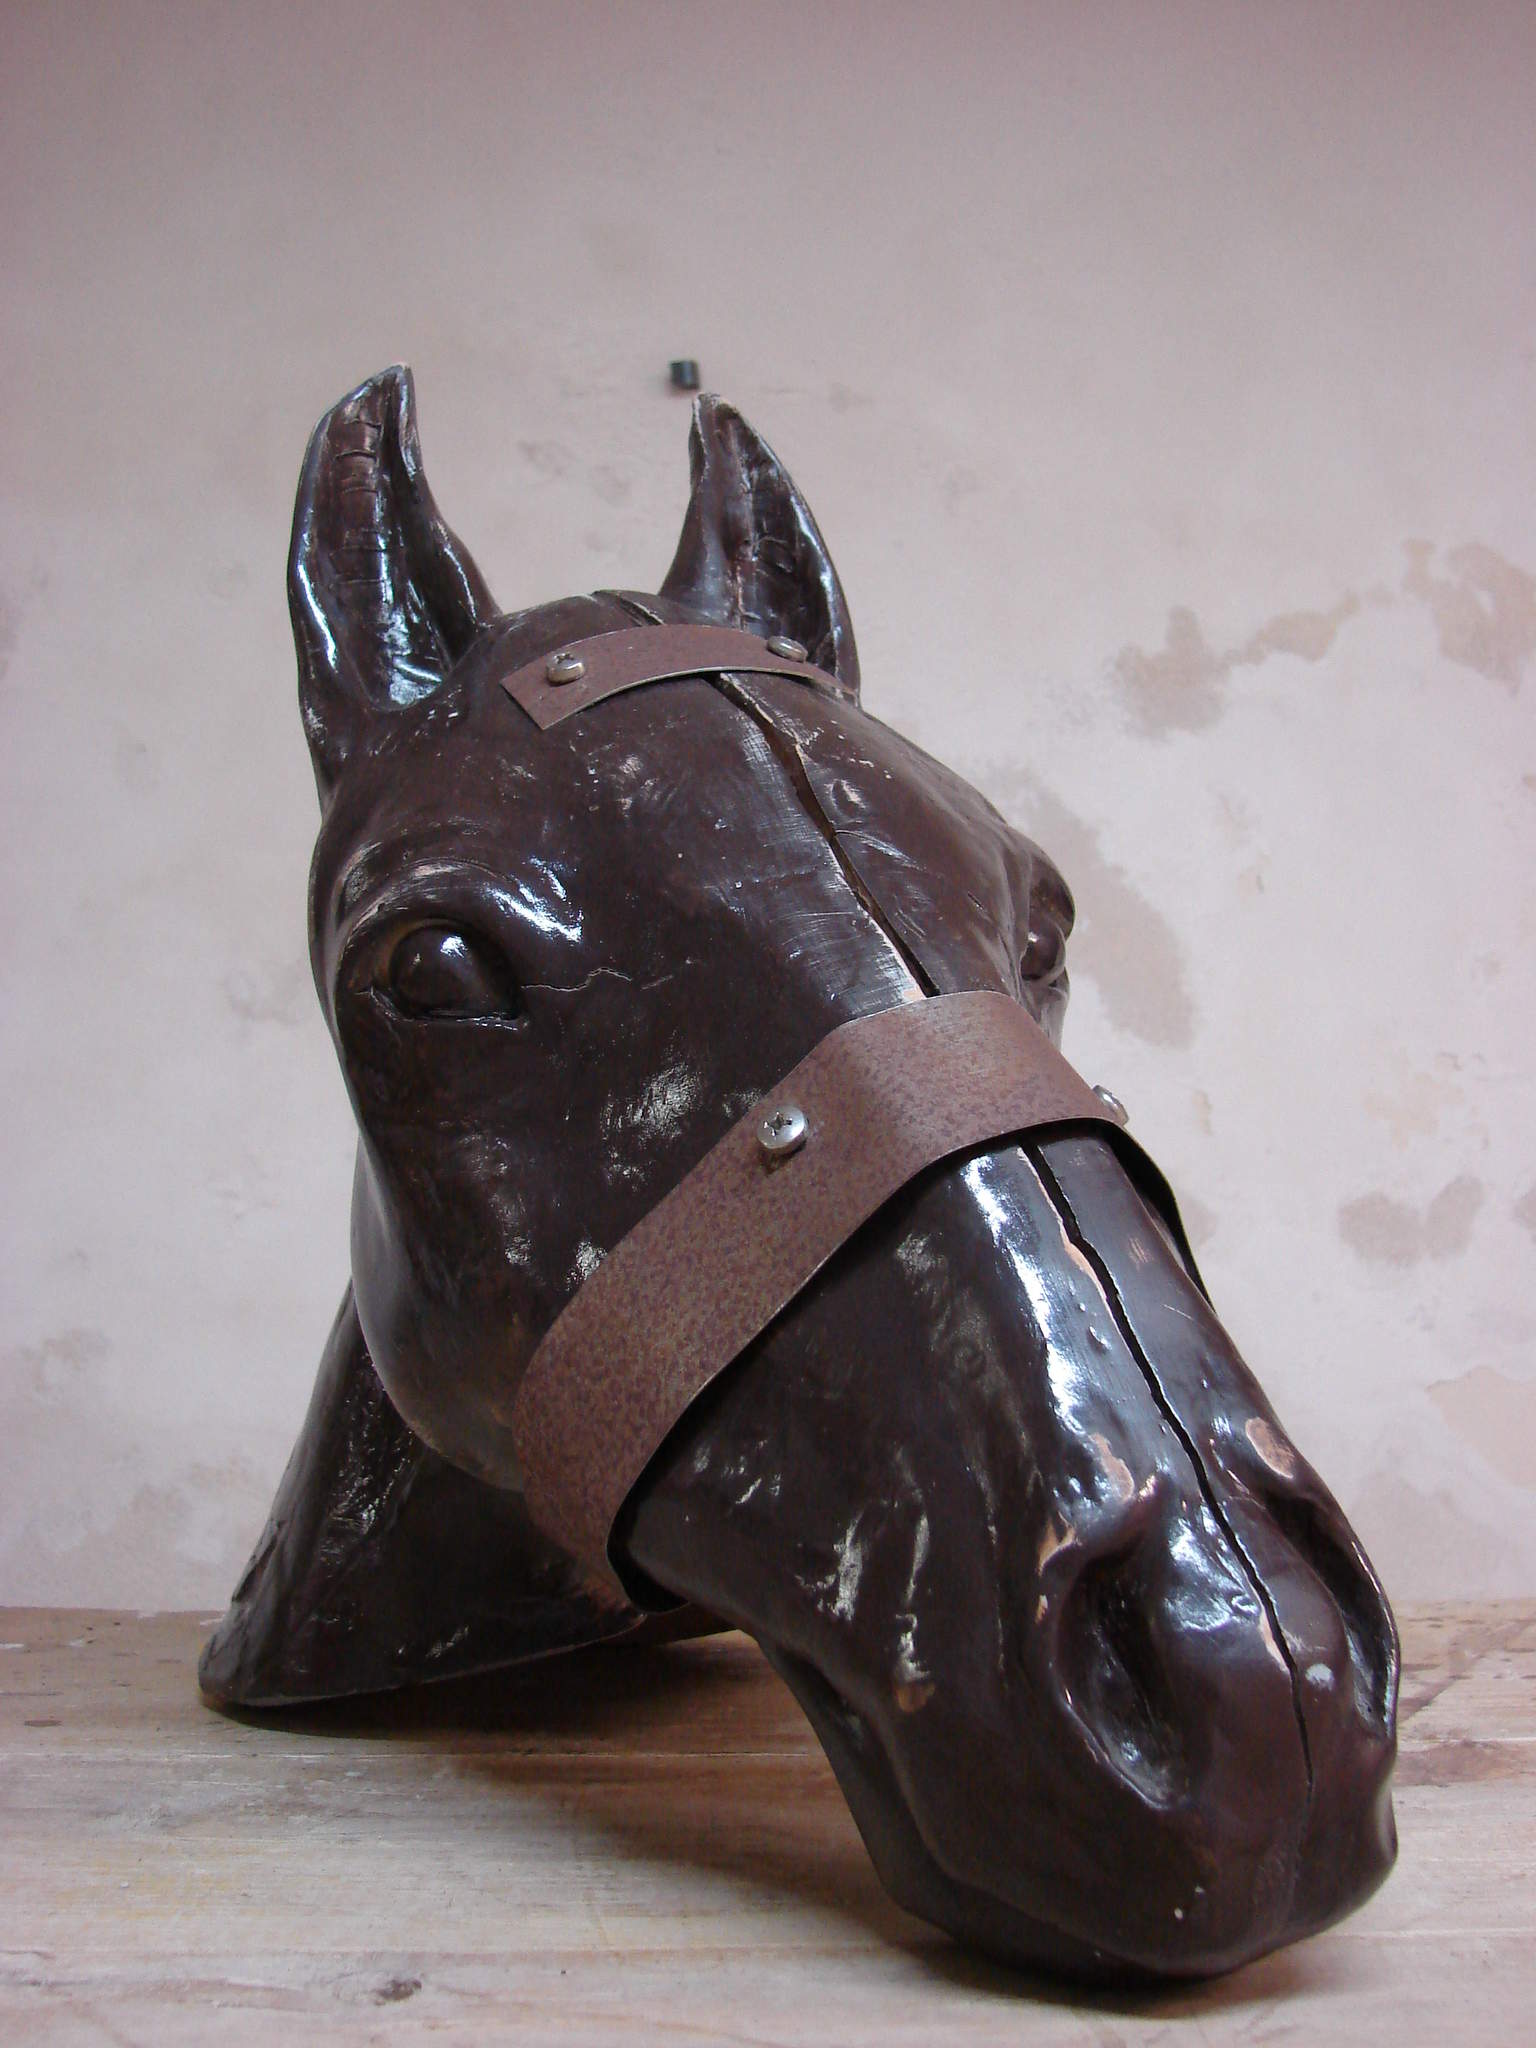 Horse, ceramic and iron, Caterina Silenzi art.
PRIVATE COLLECTION